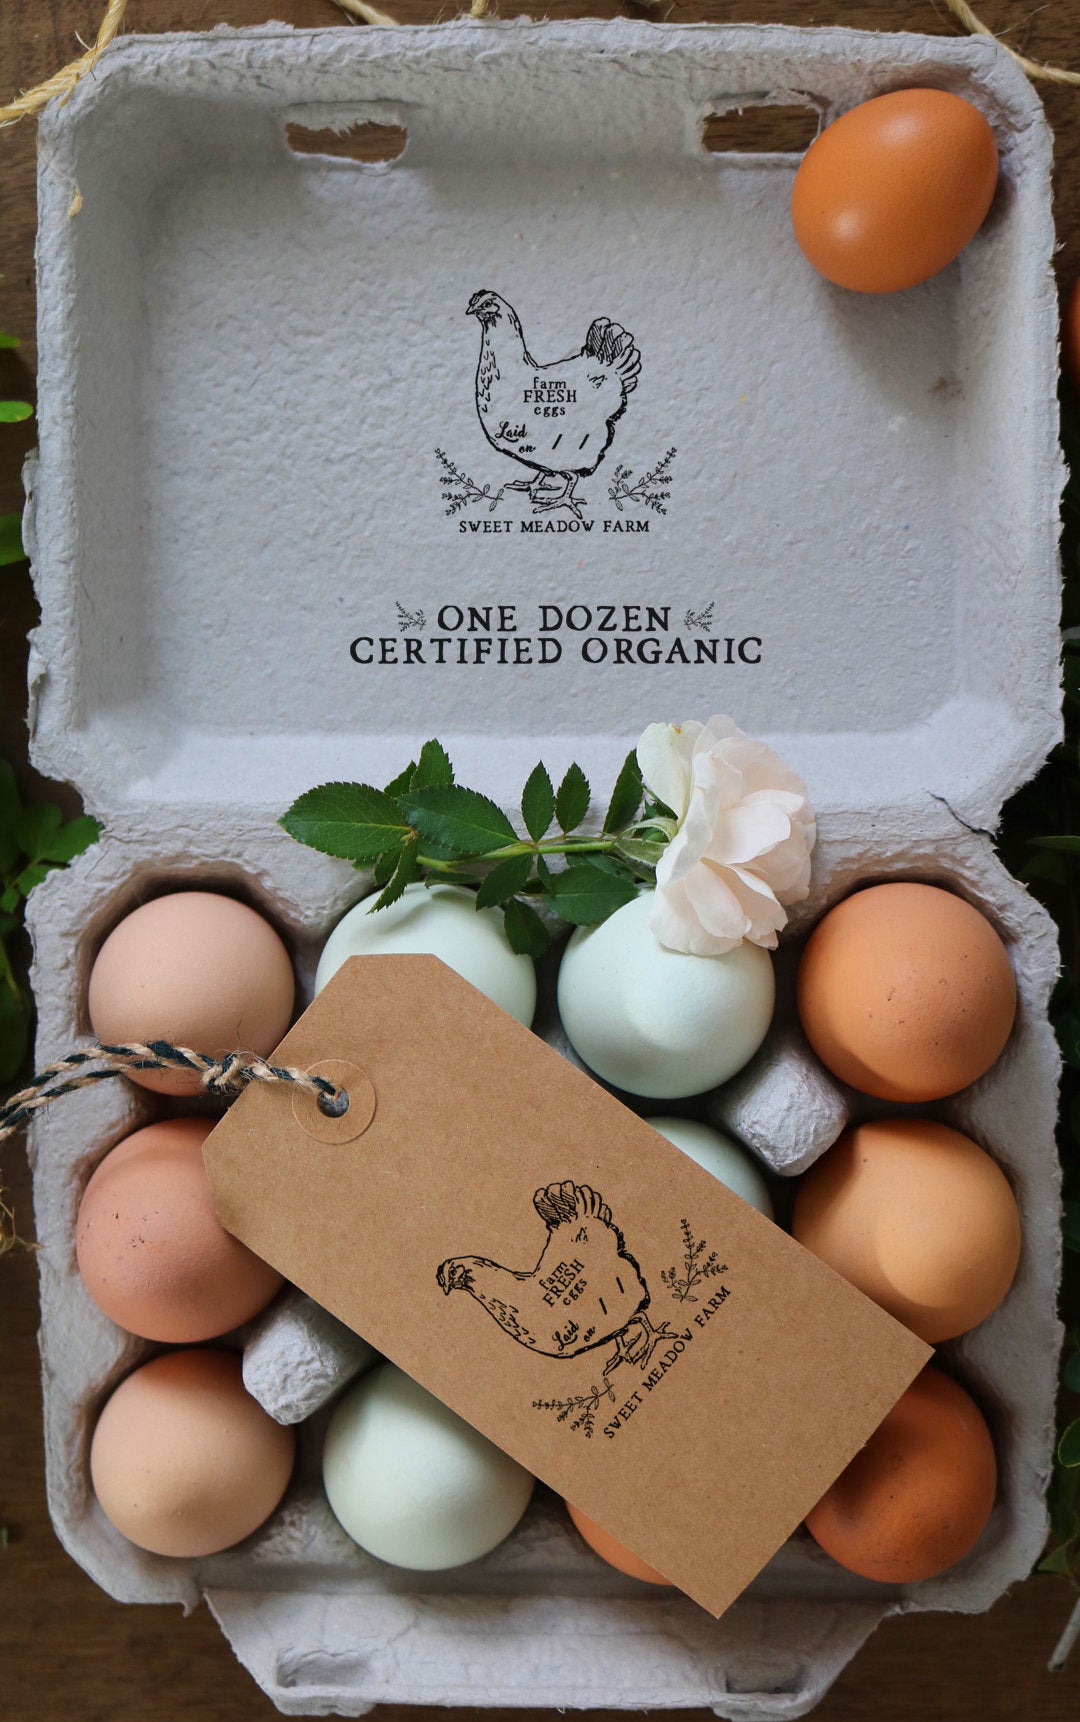 Self Inking Stamp for Personalized Egg Box Saying Backyard Fresh Egg Carton Stamp Then Your Farm Name As A Custom Stamps Self Inking for Business